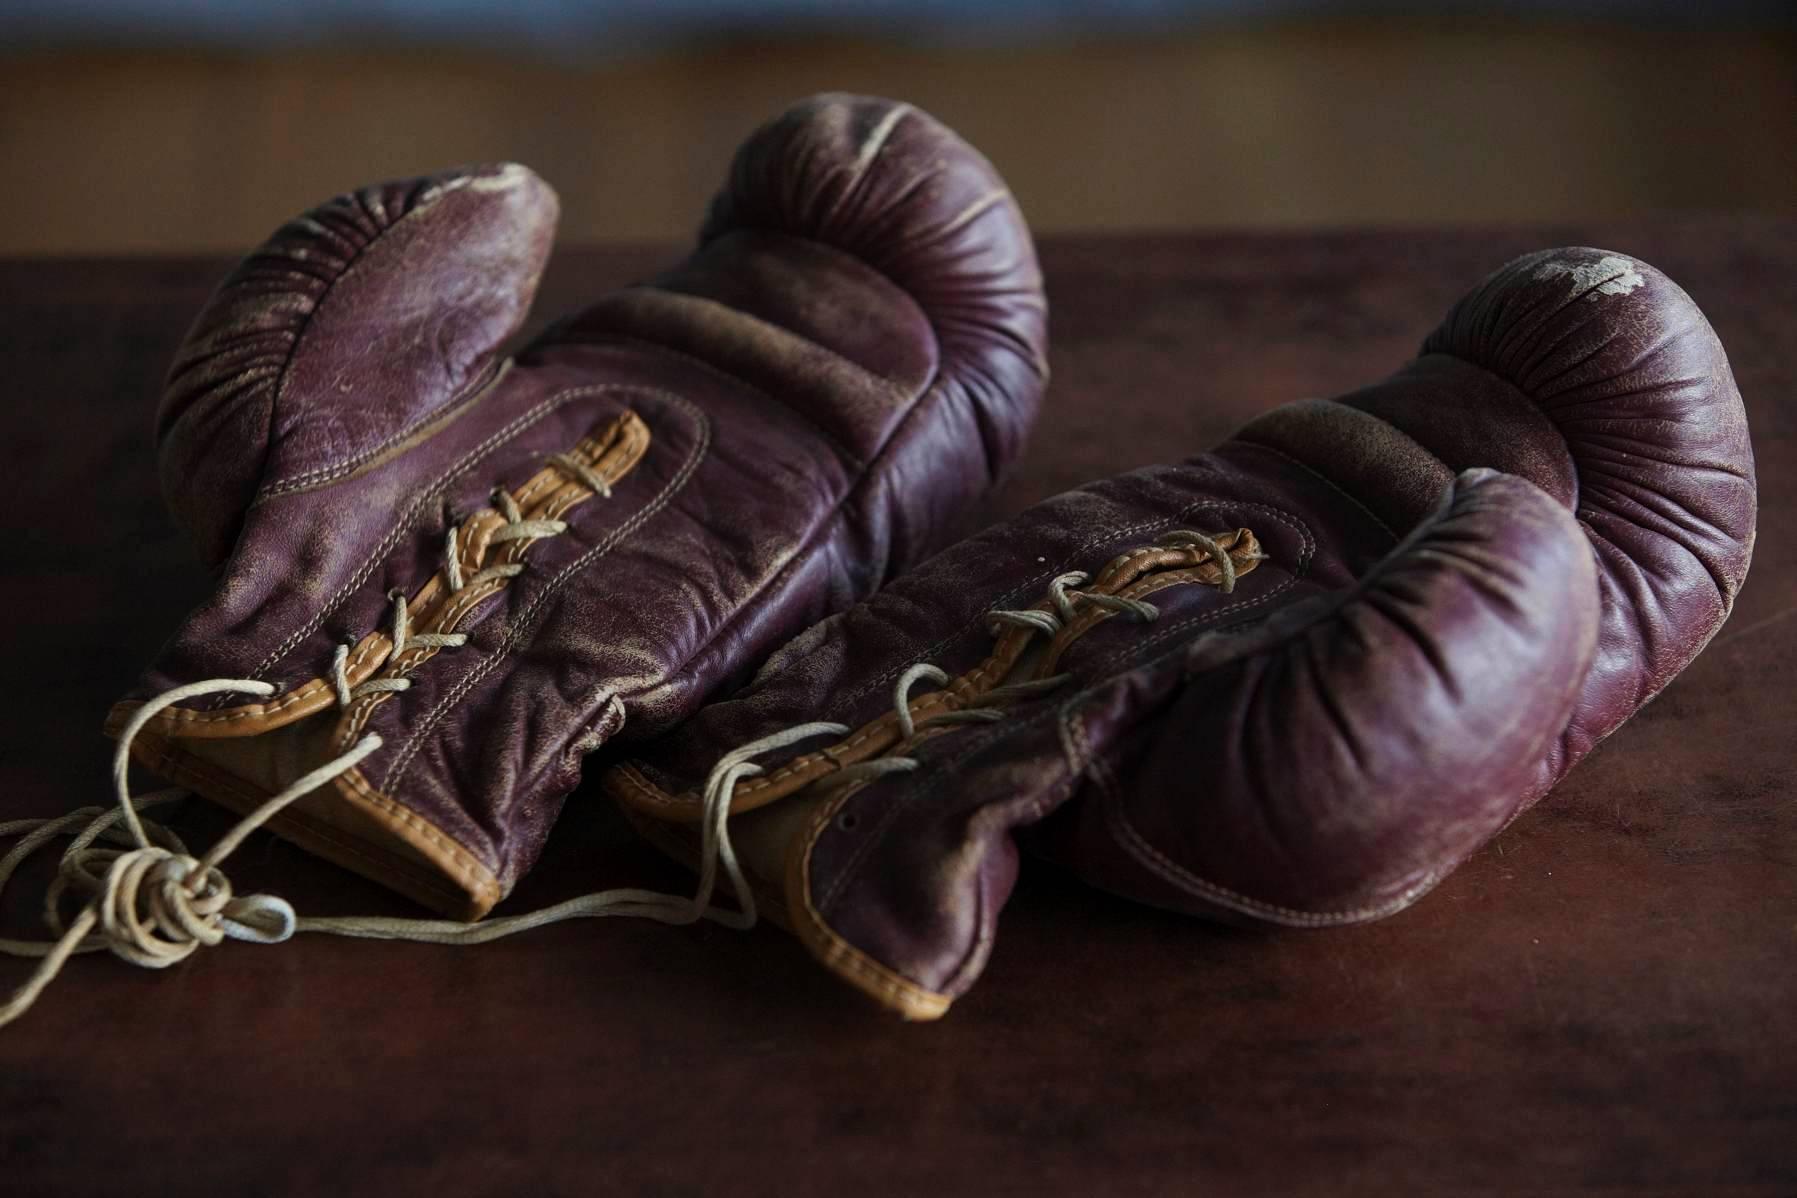 Great pair of 1930s hand stitched boxing gloves made by George A. Reach sporting goods Company.
Beautiful dark maroon leather trimmed with brown edges and a nice patina. 
The gloves are of highest quality for that area, the leather remains soft